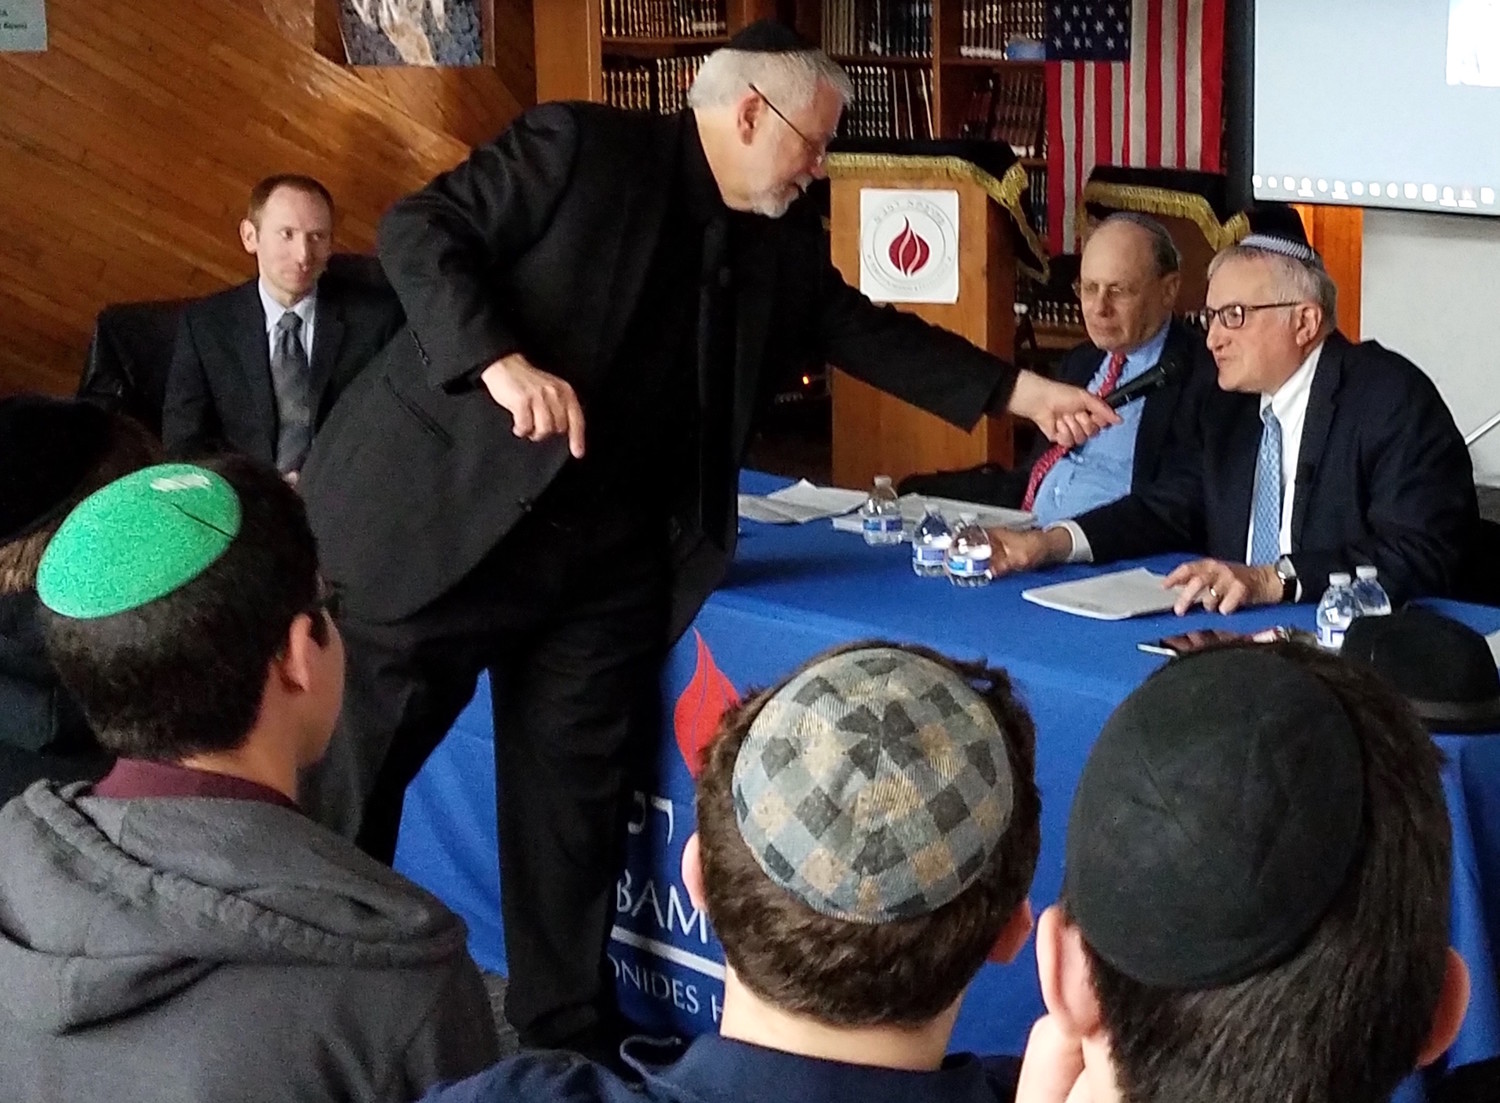 Rabbi Yotav Eliach (at right) is greeted at the launch of his book, “Judaism, Zionism and the Land of Israel."